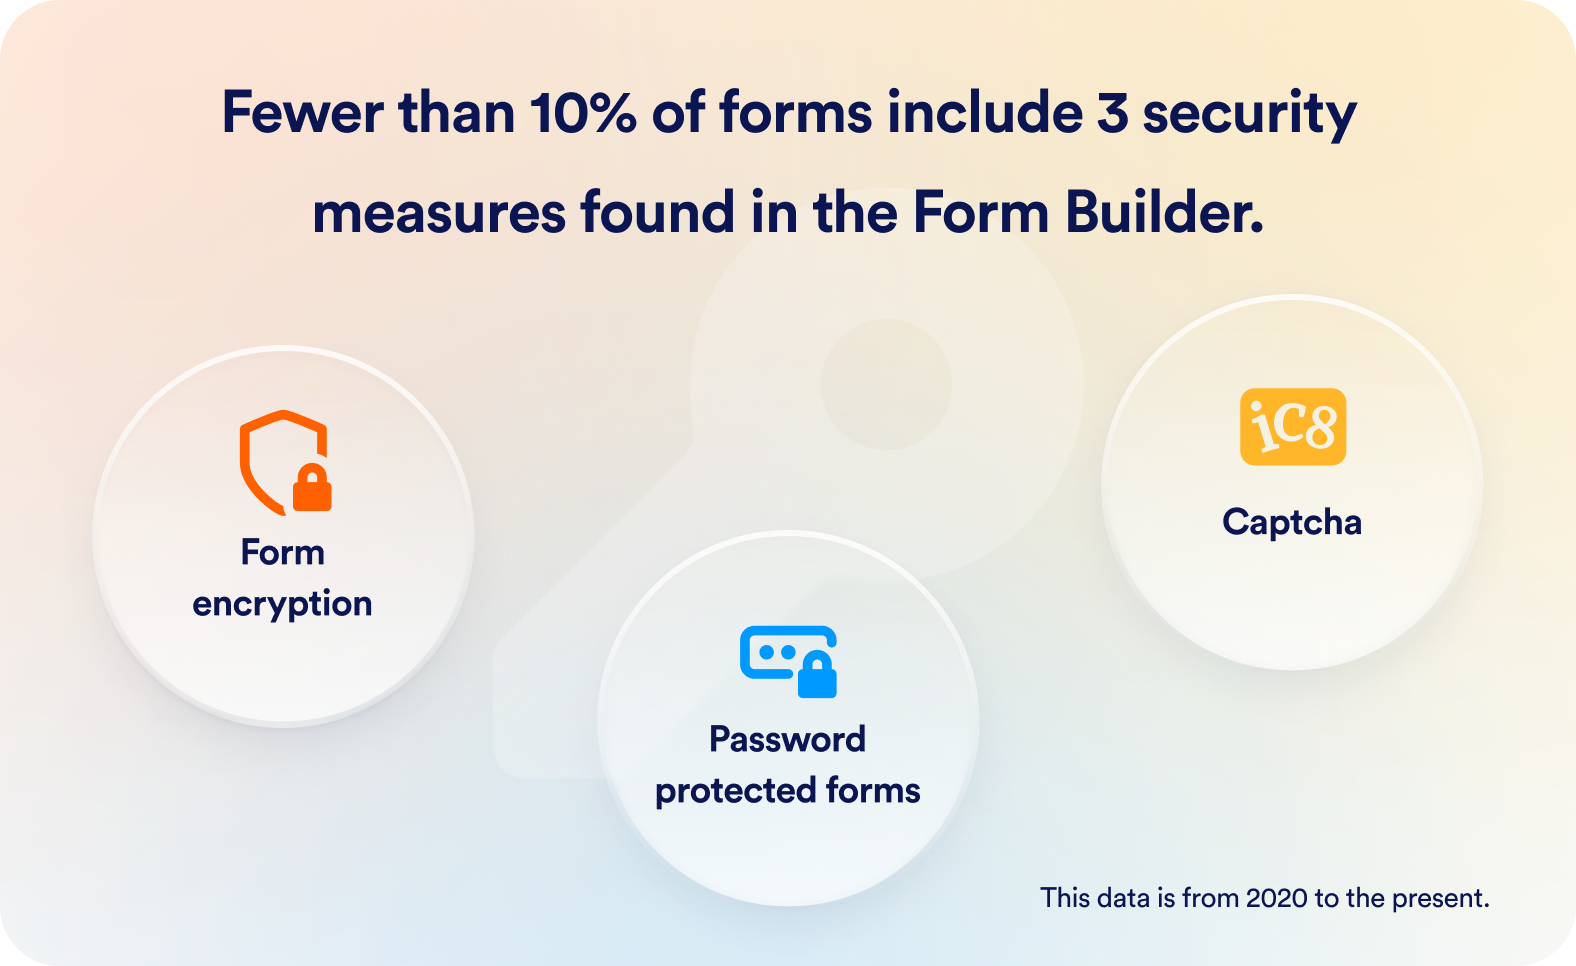 Fewer than 10% of forms include 3 security measures found in Form Builder.